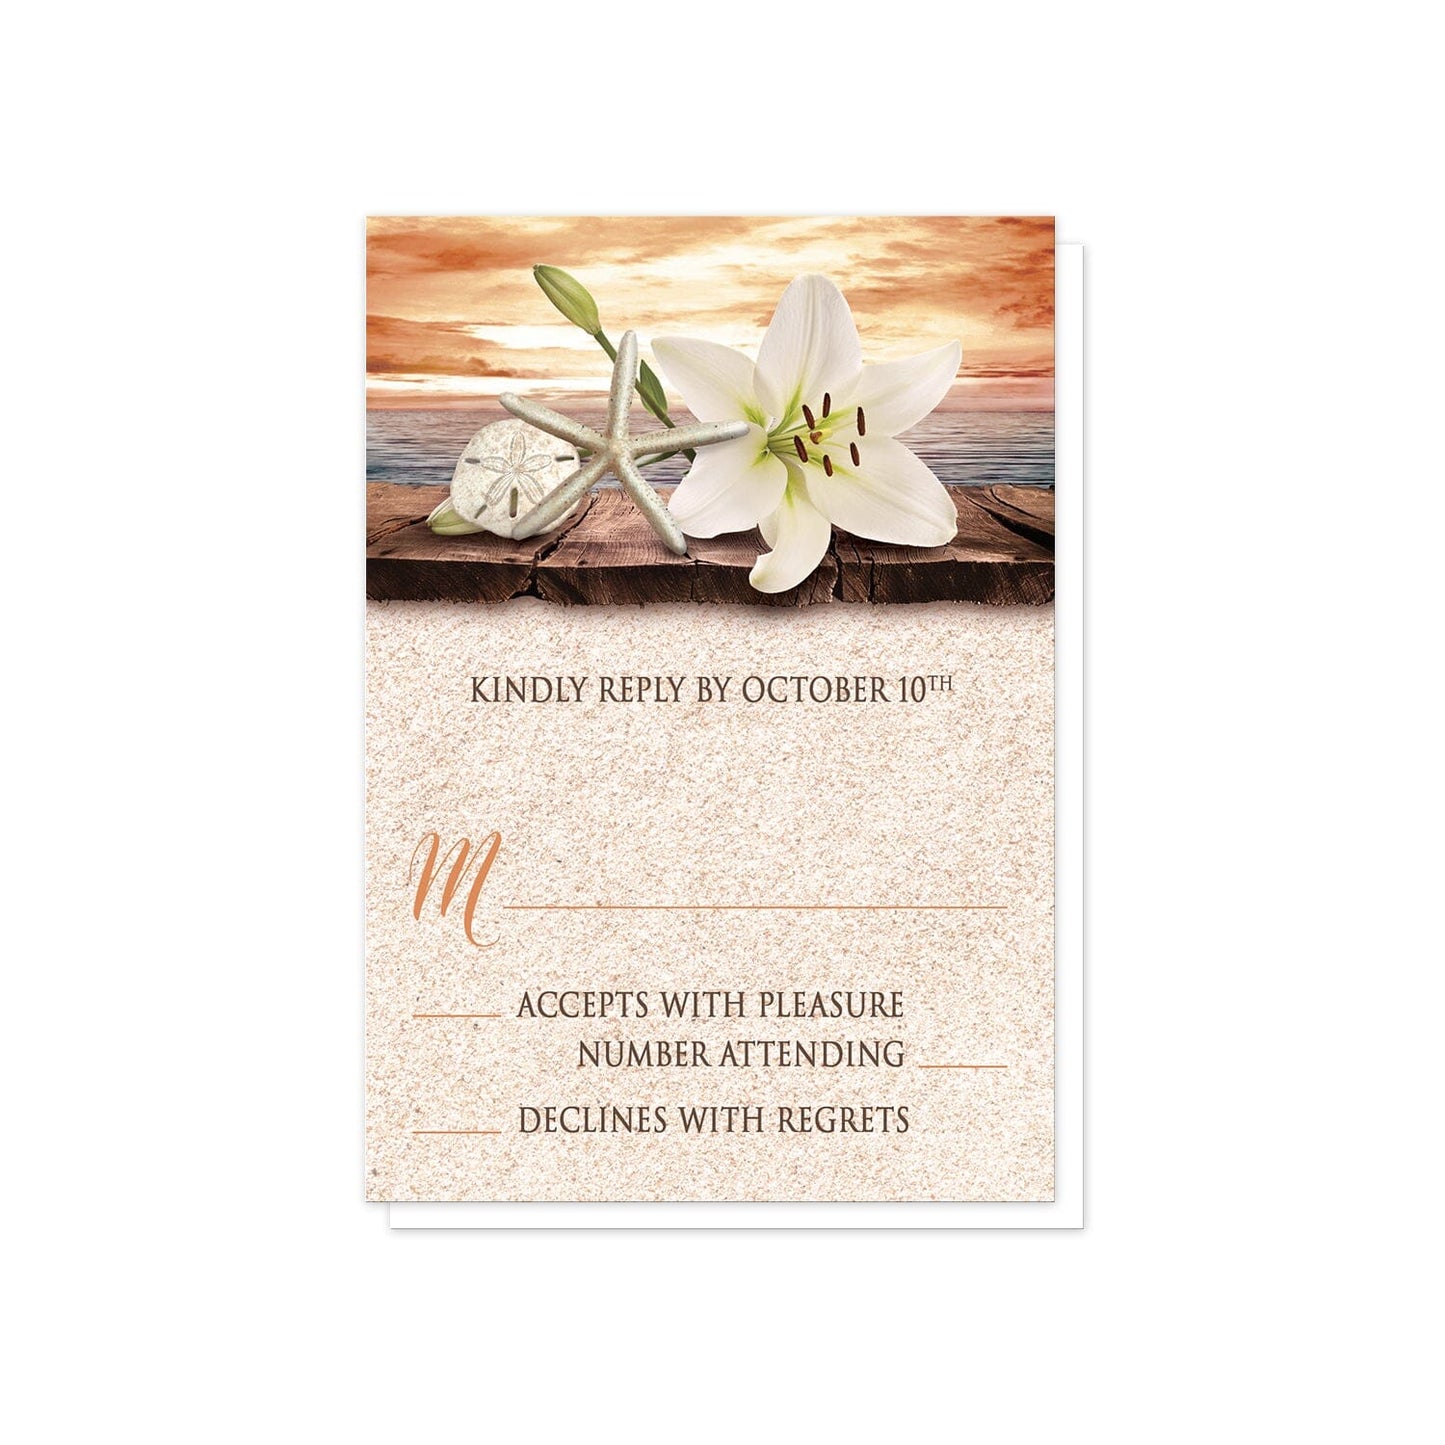 Lily Seashells and Sand Autumn Beach RSVP Cards at Artistically Invited.